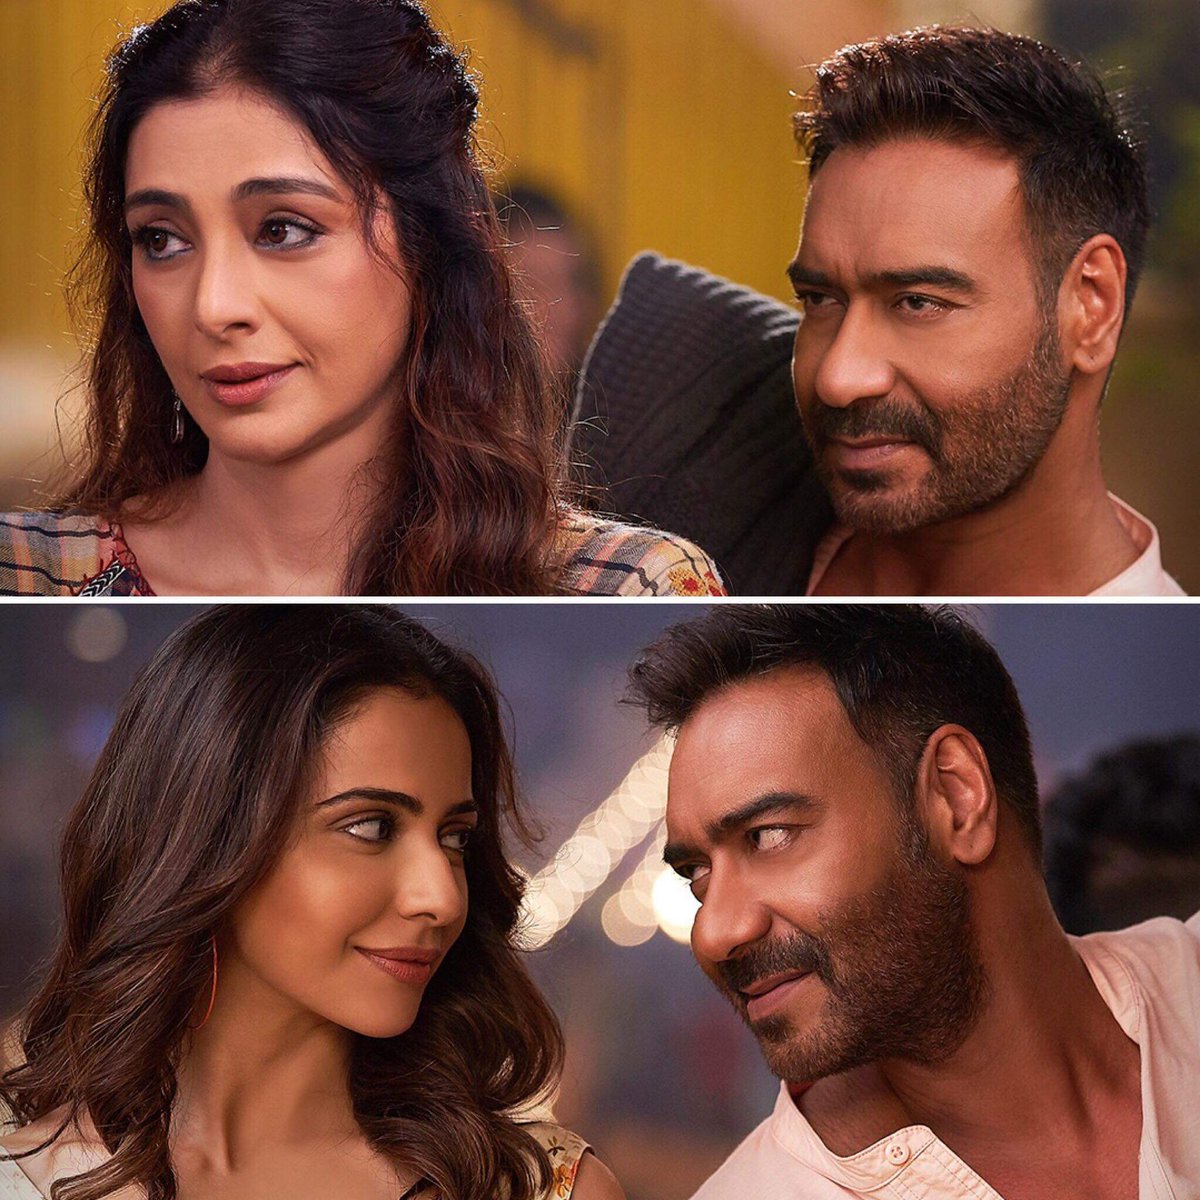 #OneWordReview...
#DeDePyaarDe: WINNER!
Rating: ⭐️⭐️⭐️⭐️
Entertains big time... Smart writing, plenty of laugh aloud moments, strong emotions, top notch acts [Ajay, Tabu, Rakul Preet]... Director Akiv Ali gives a refreshing twist to relationships. Watch it! #DDPD #DDPDReview